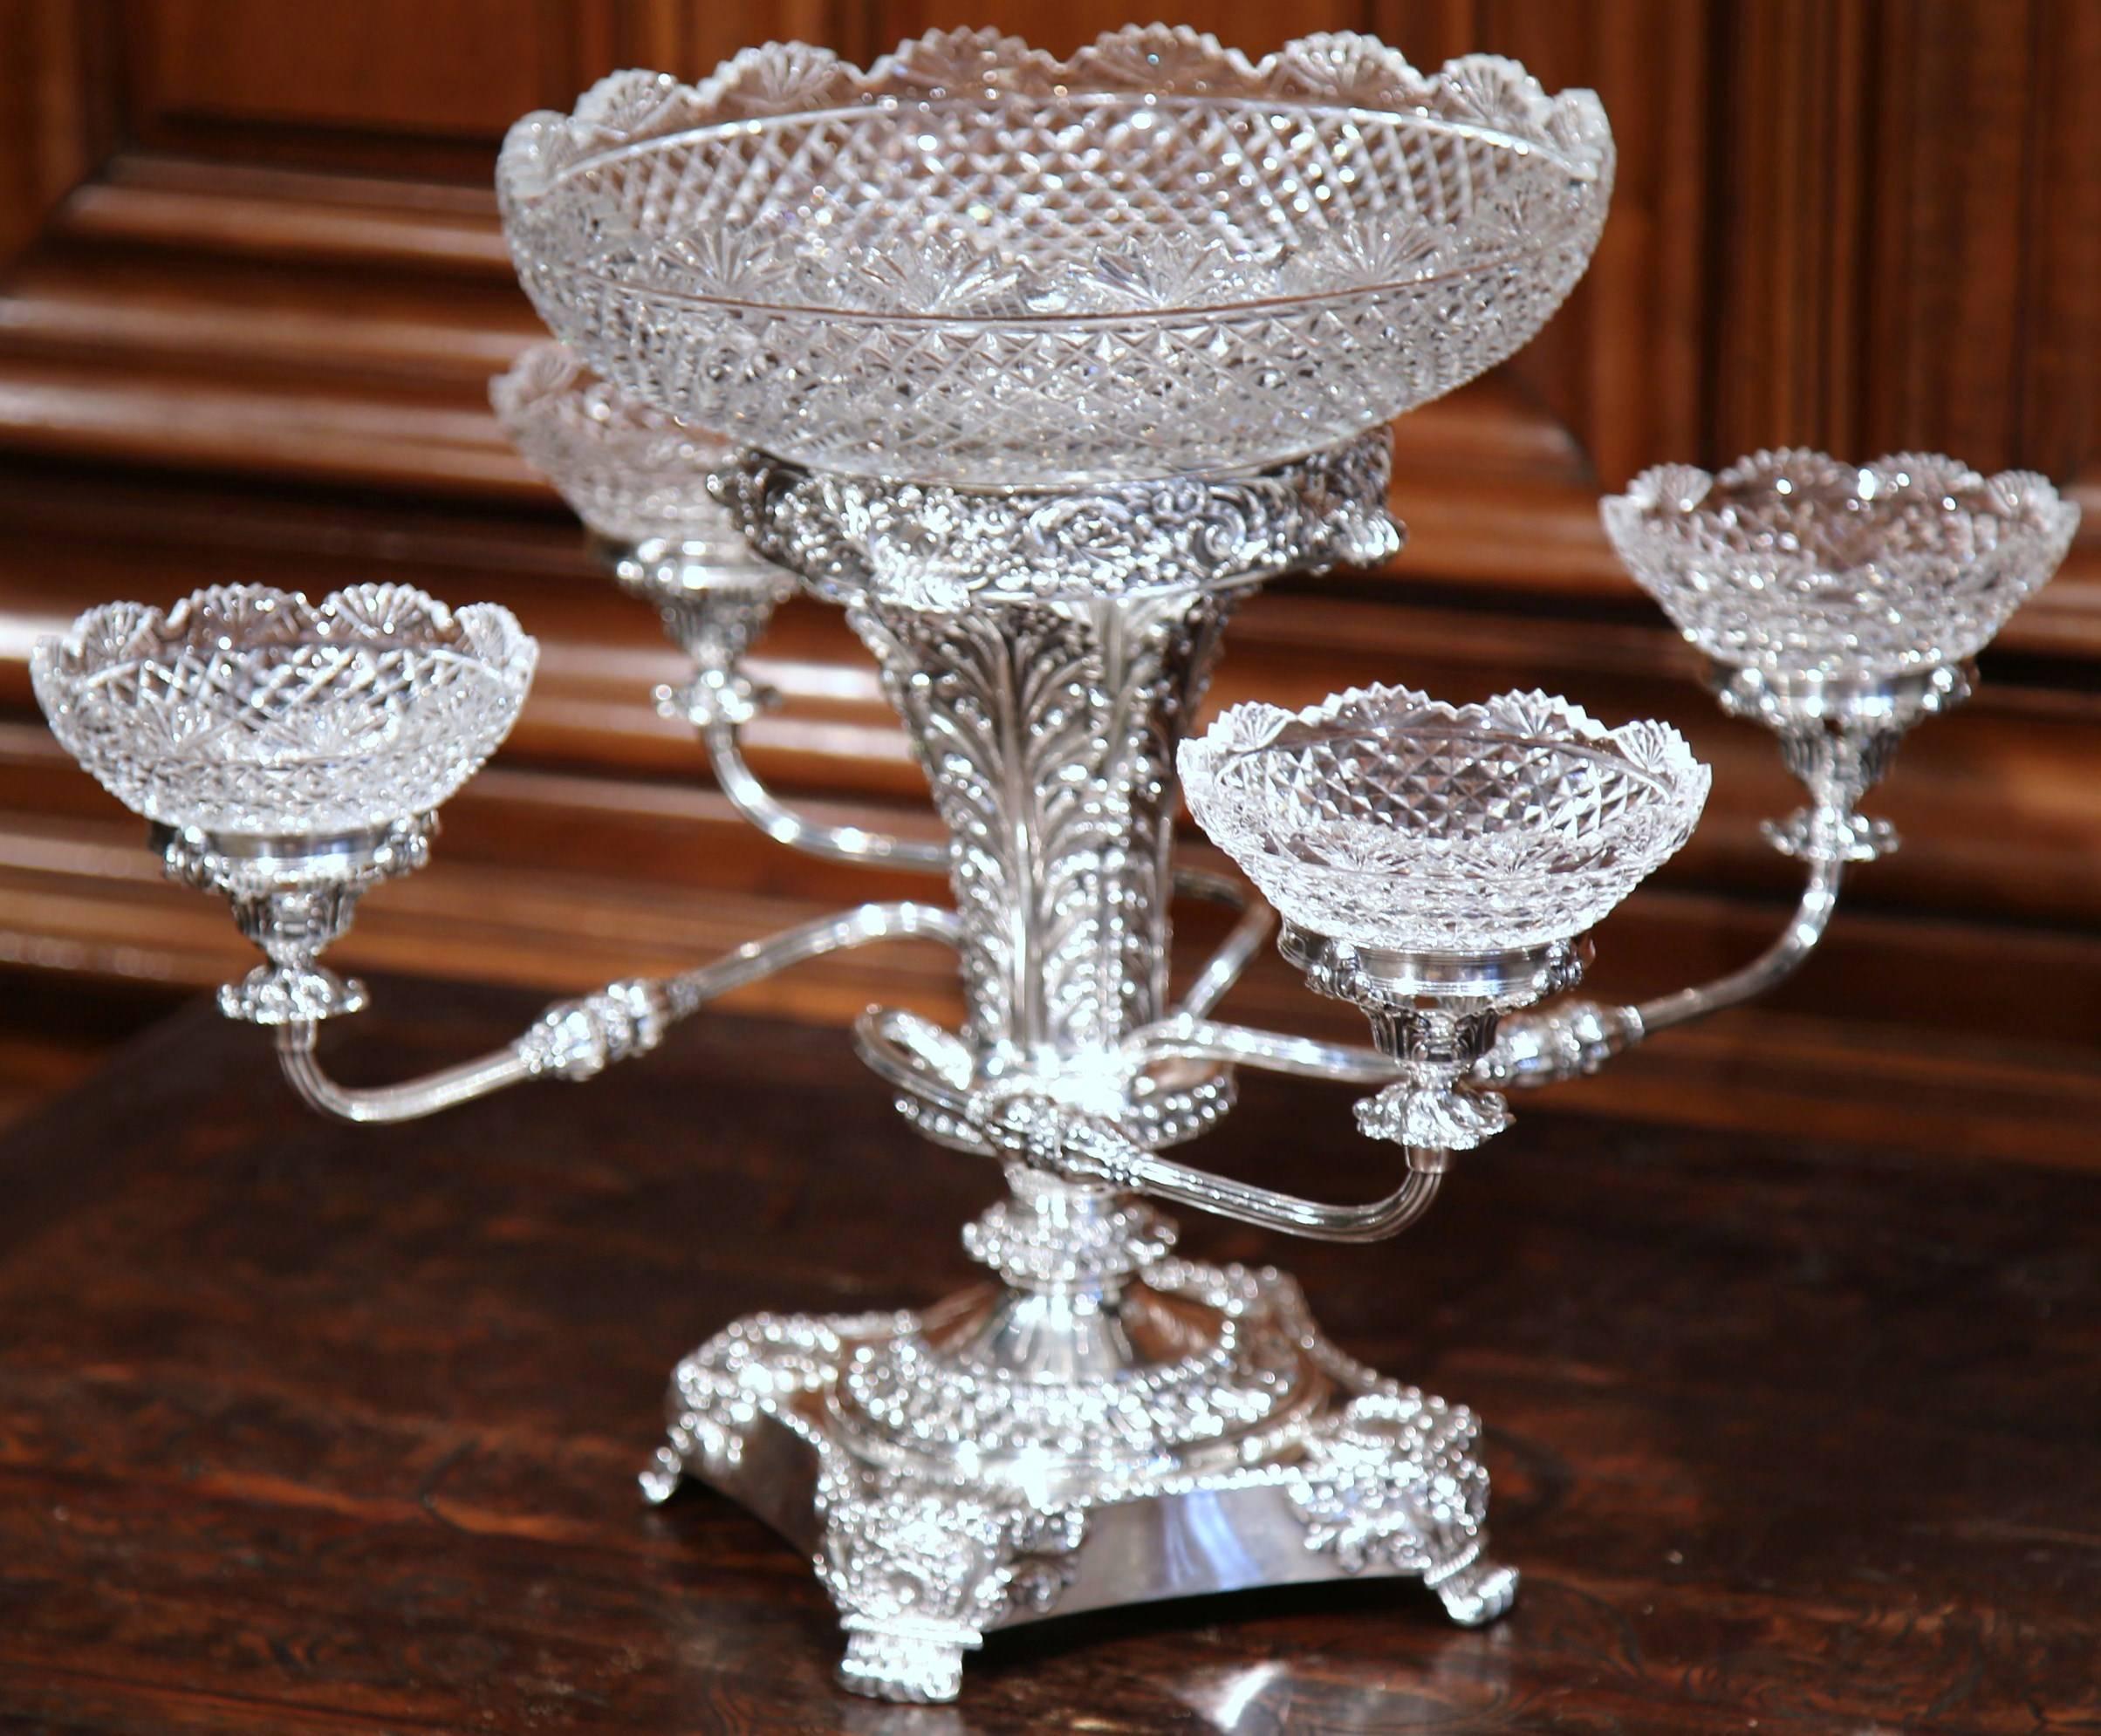 Hand-Crafted 19th Century English Silver Plated Epergne Centrepiece with Five Cut-Glass Bowls